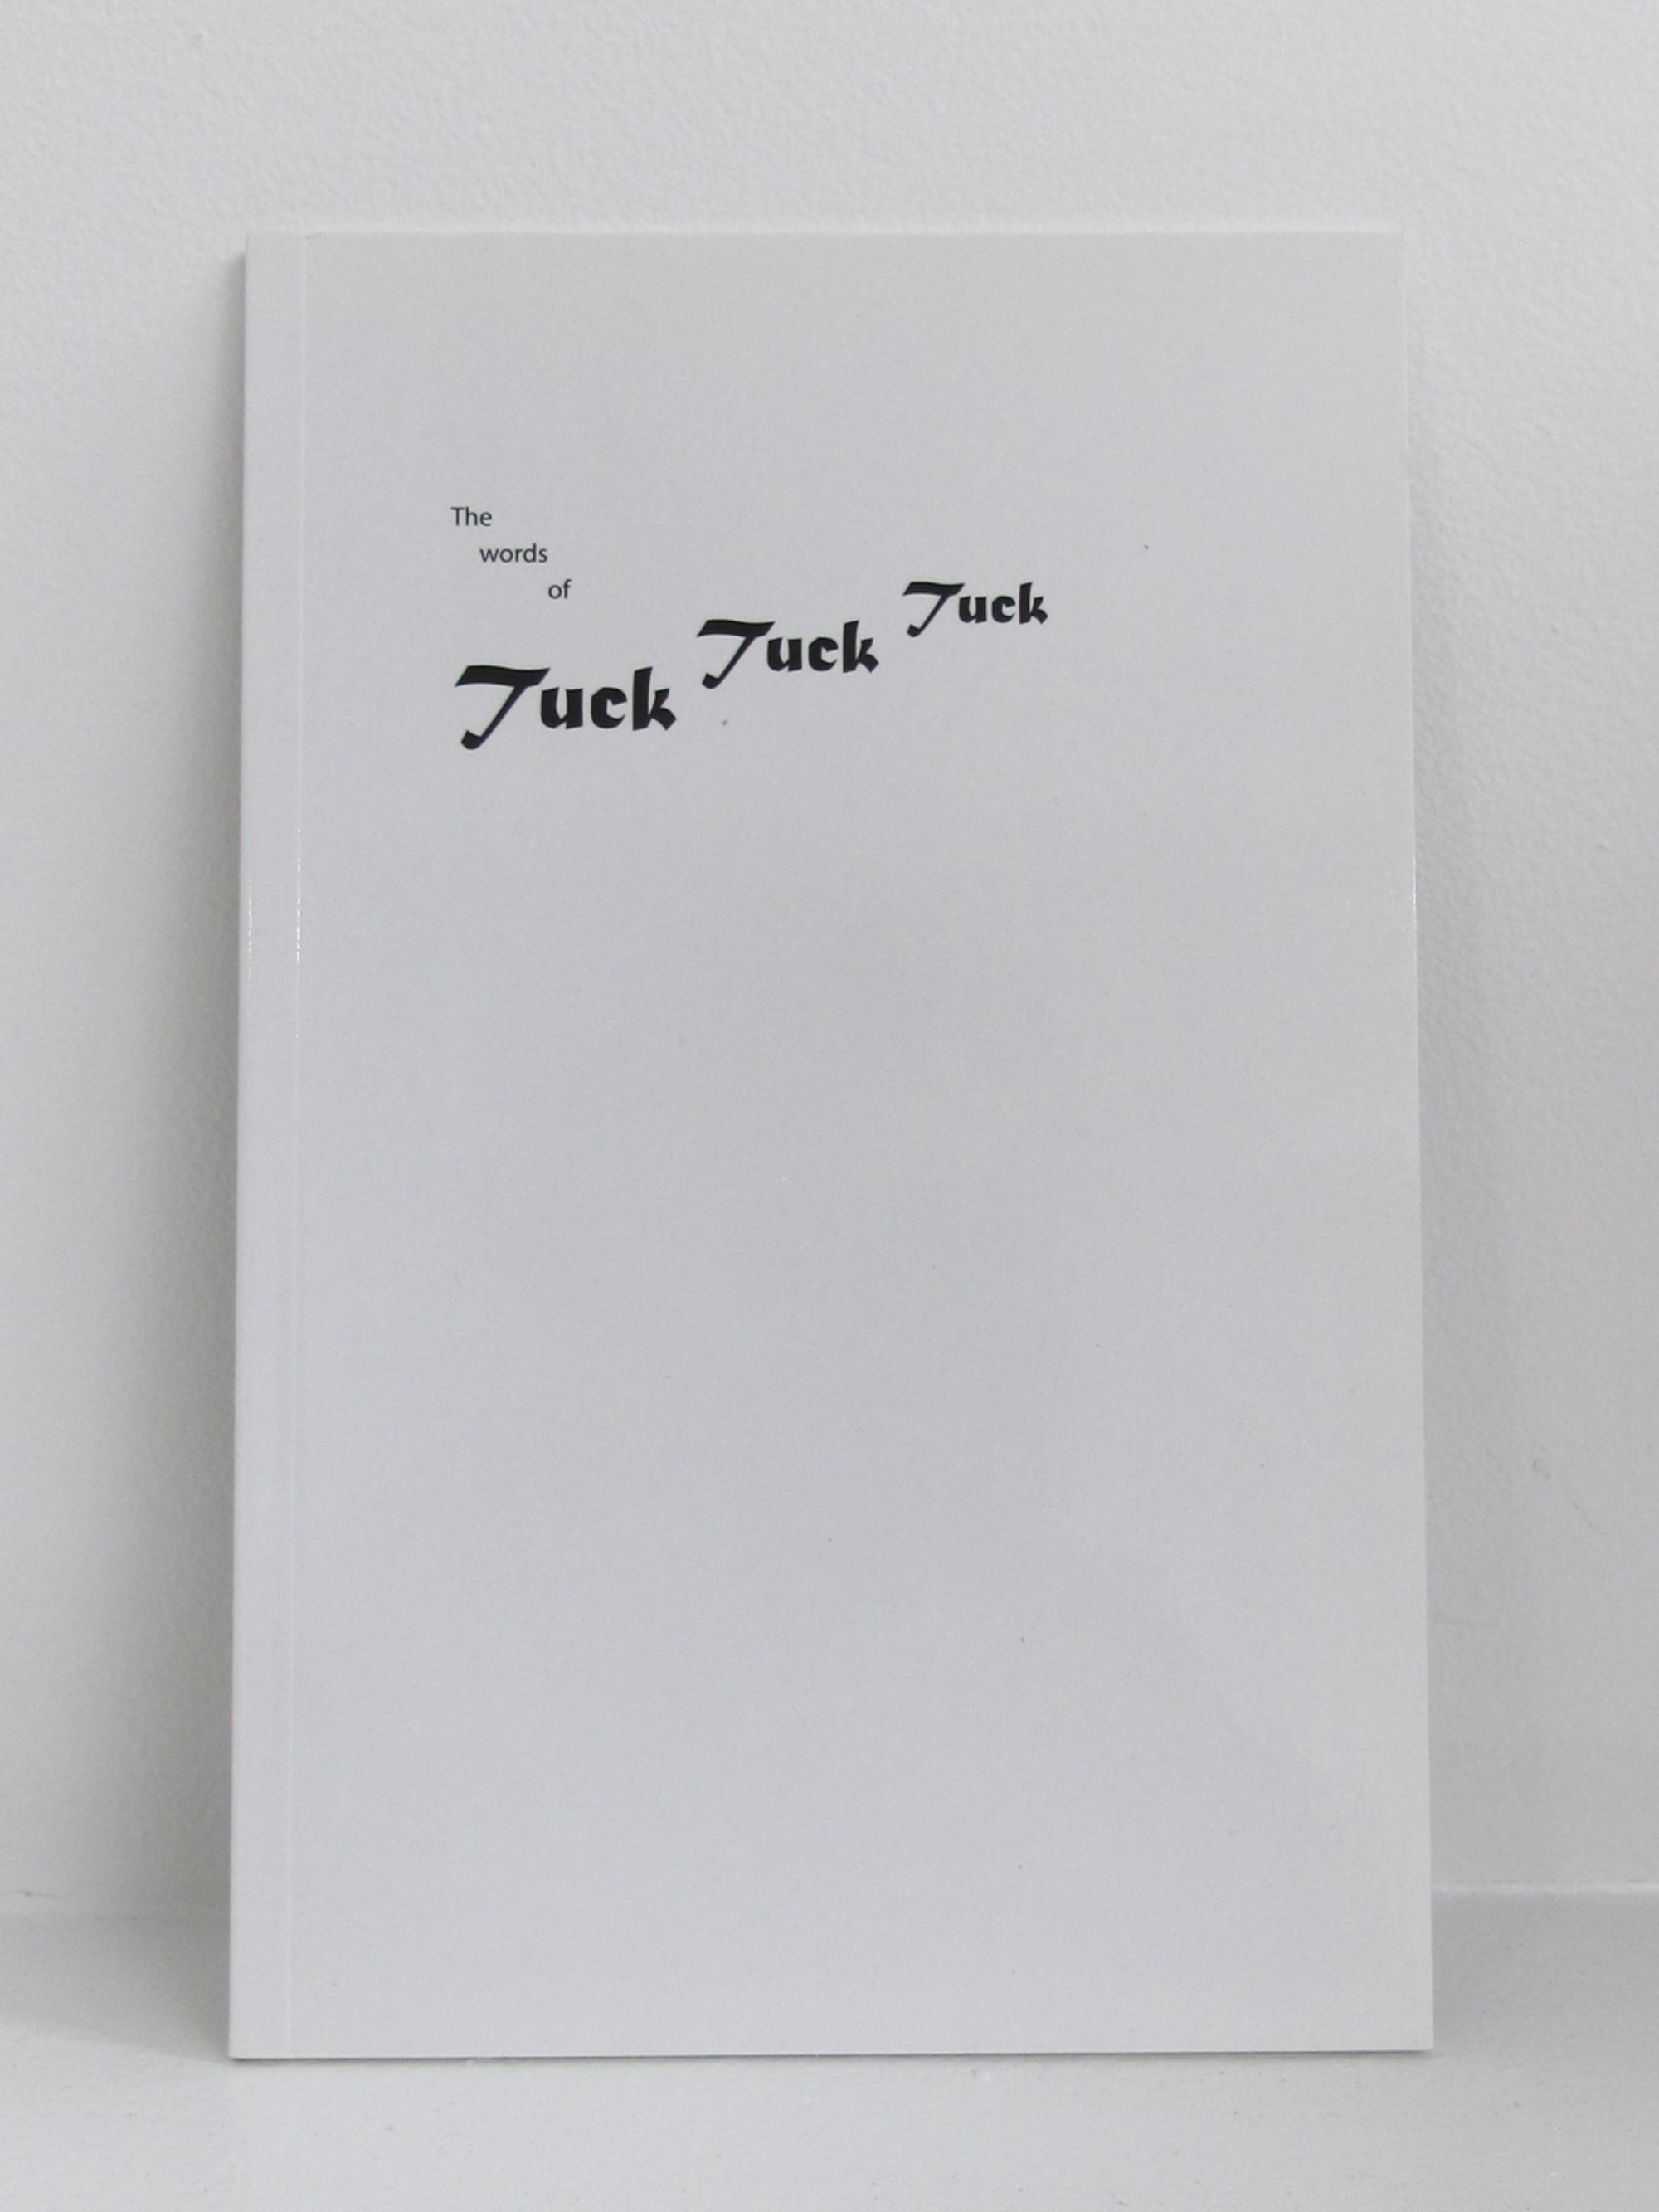 Book cover on plain background with title of The Words of Tuck Tuck Tuck